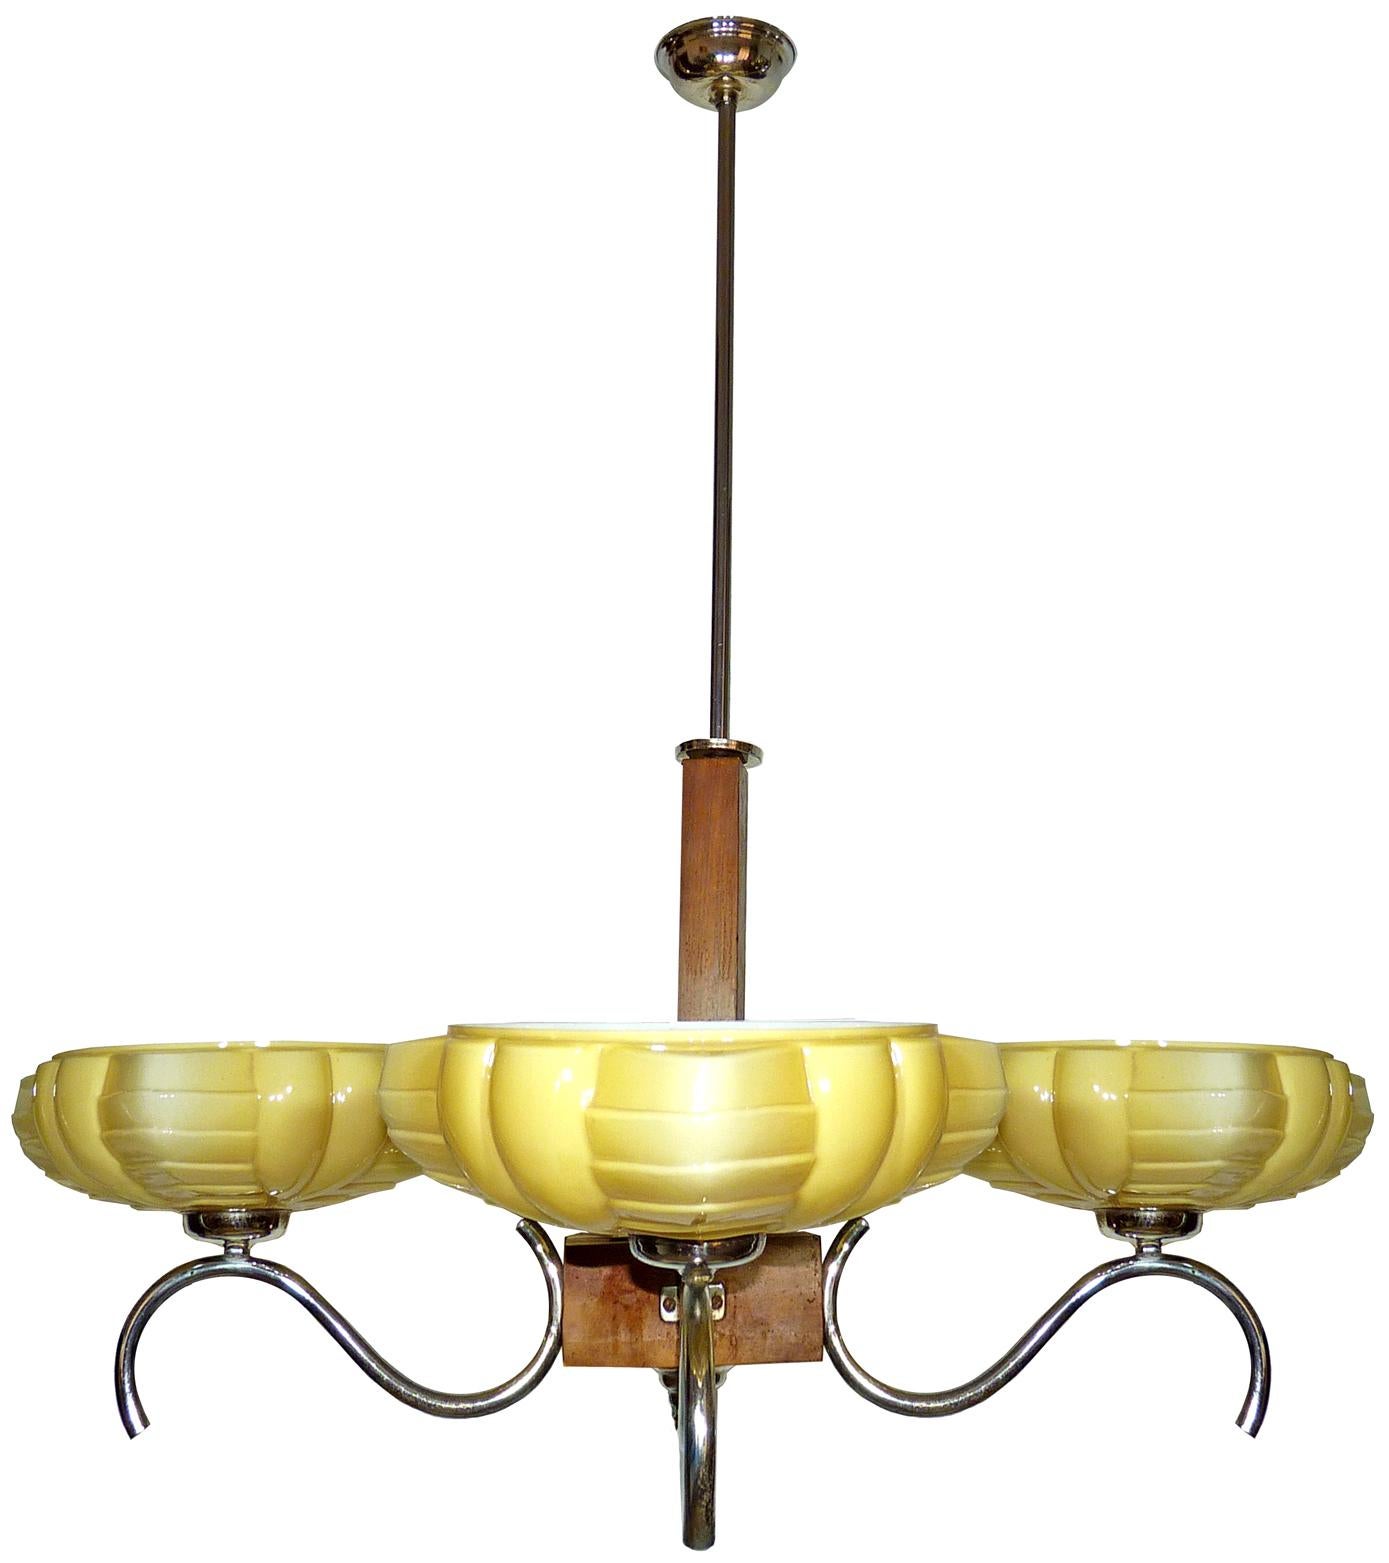 Mid-20th Century Modernist French Art-Deco w Wood, Chrome & Yellow Double Glass Bauhaus Chandelier